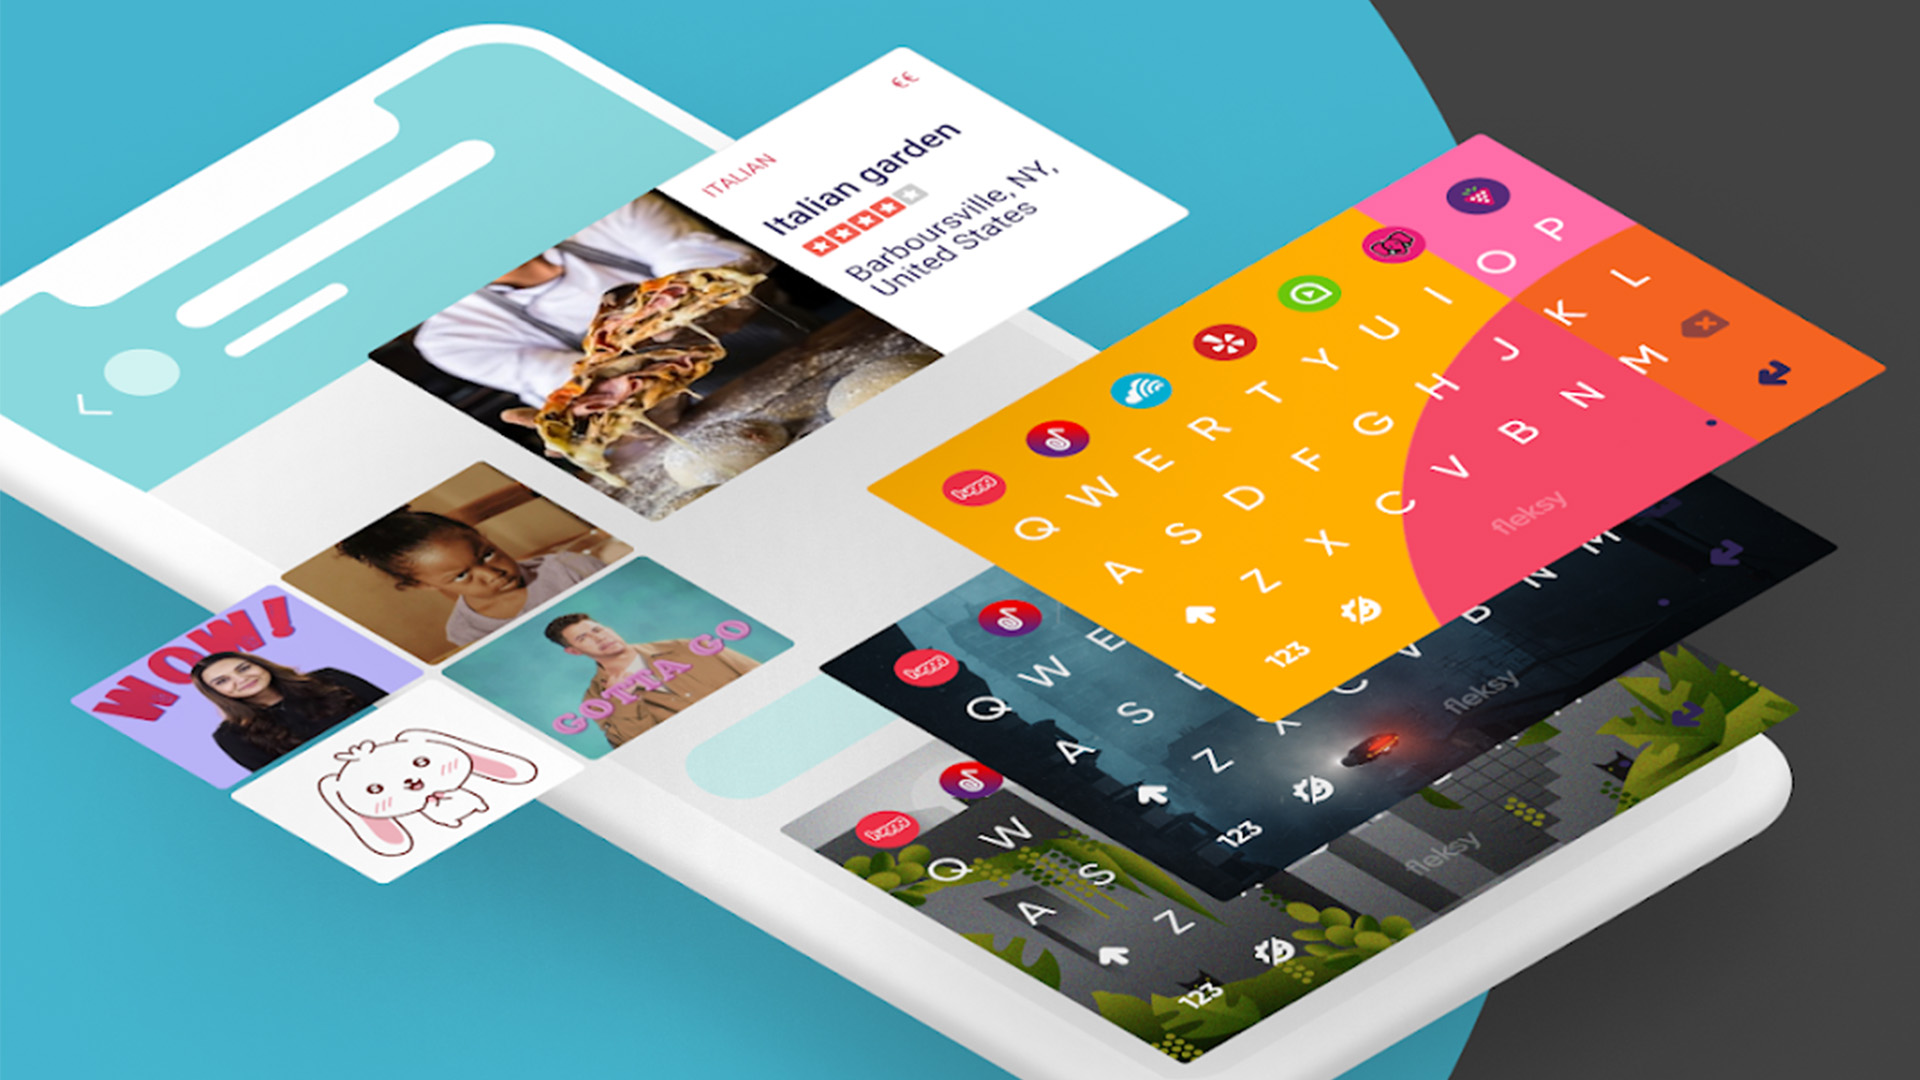 Fleksy best Android keyboards